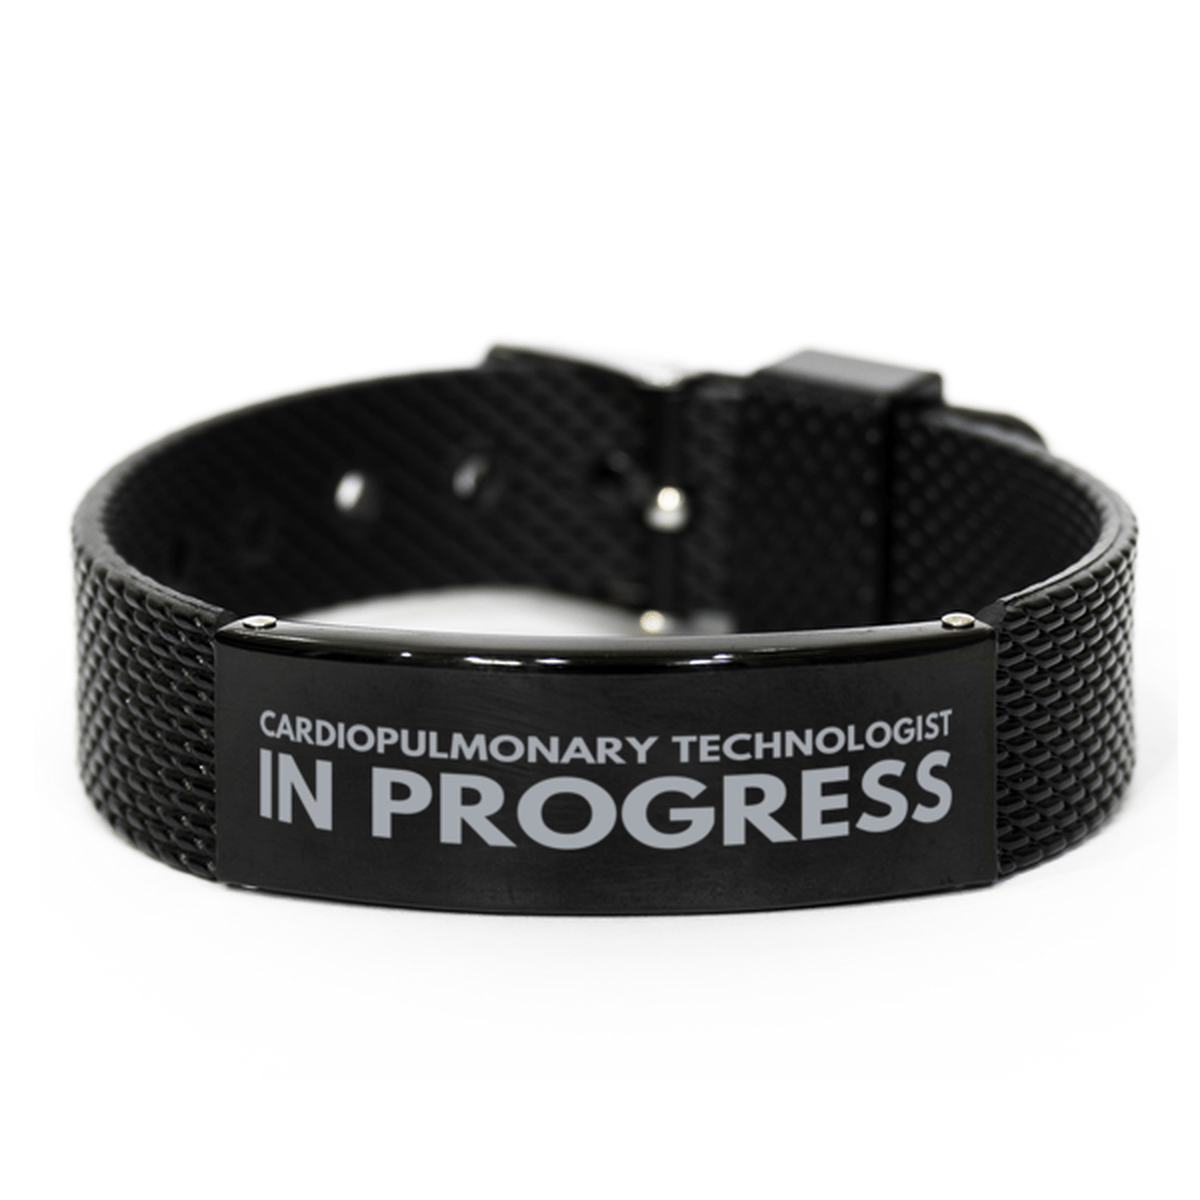 Inspirational Cardiopulmonary Technologist Black Shark Mesh Bracelet, Cardiopulmonary Technologist In Progress, Best Graduation Gifts for Students